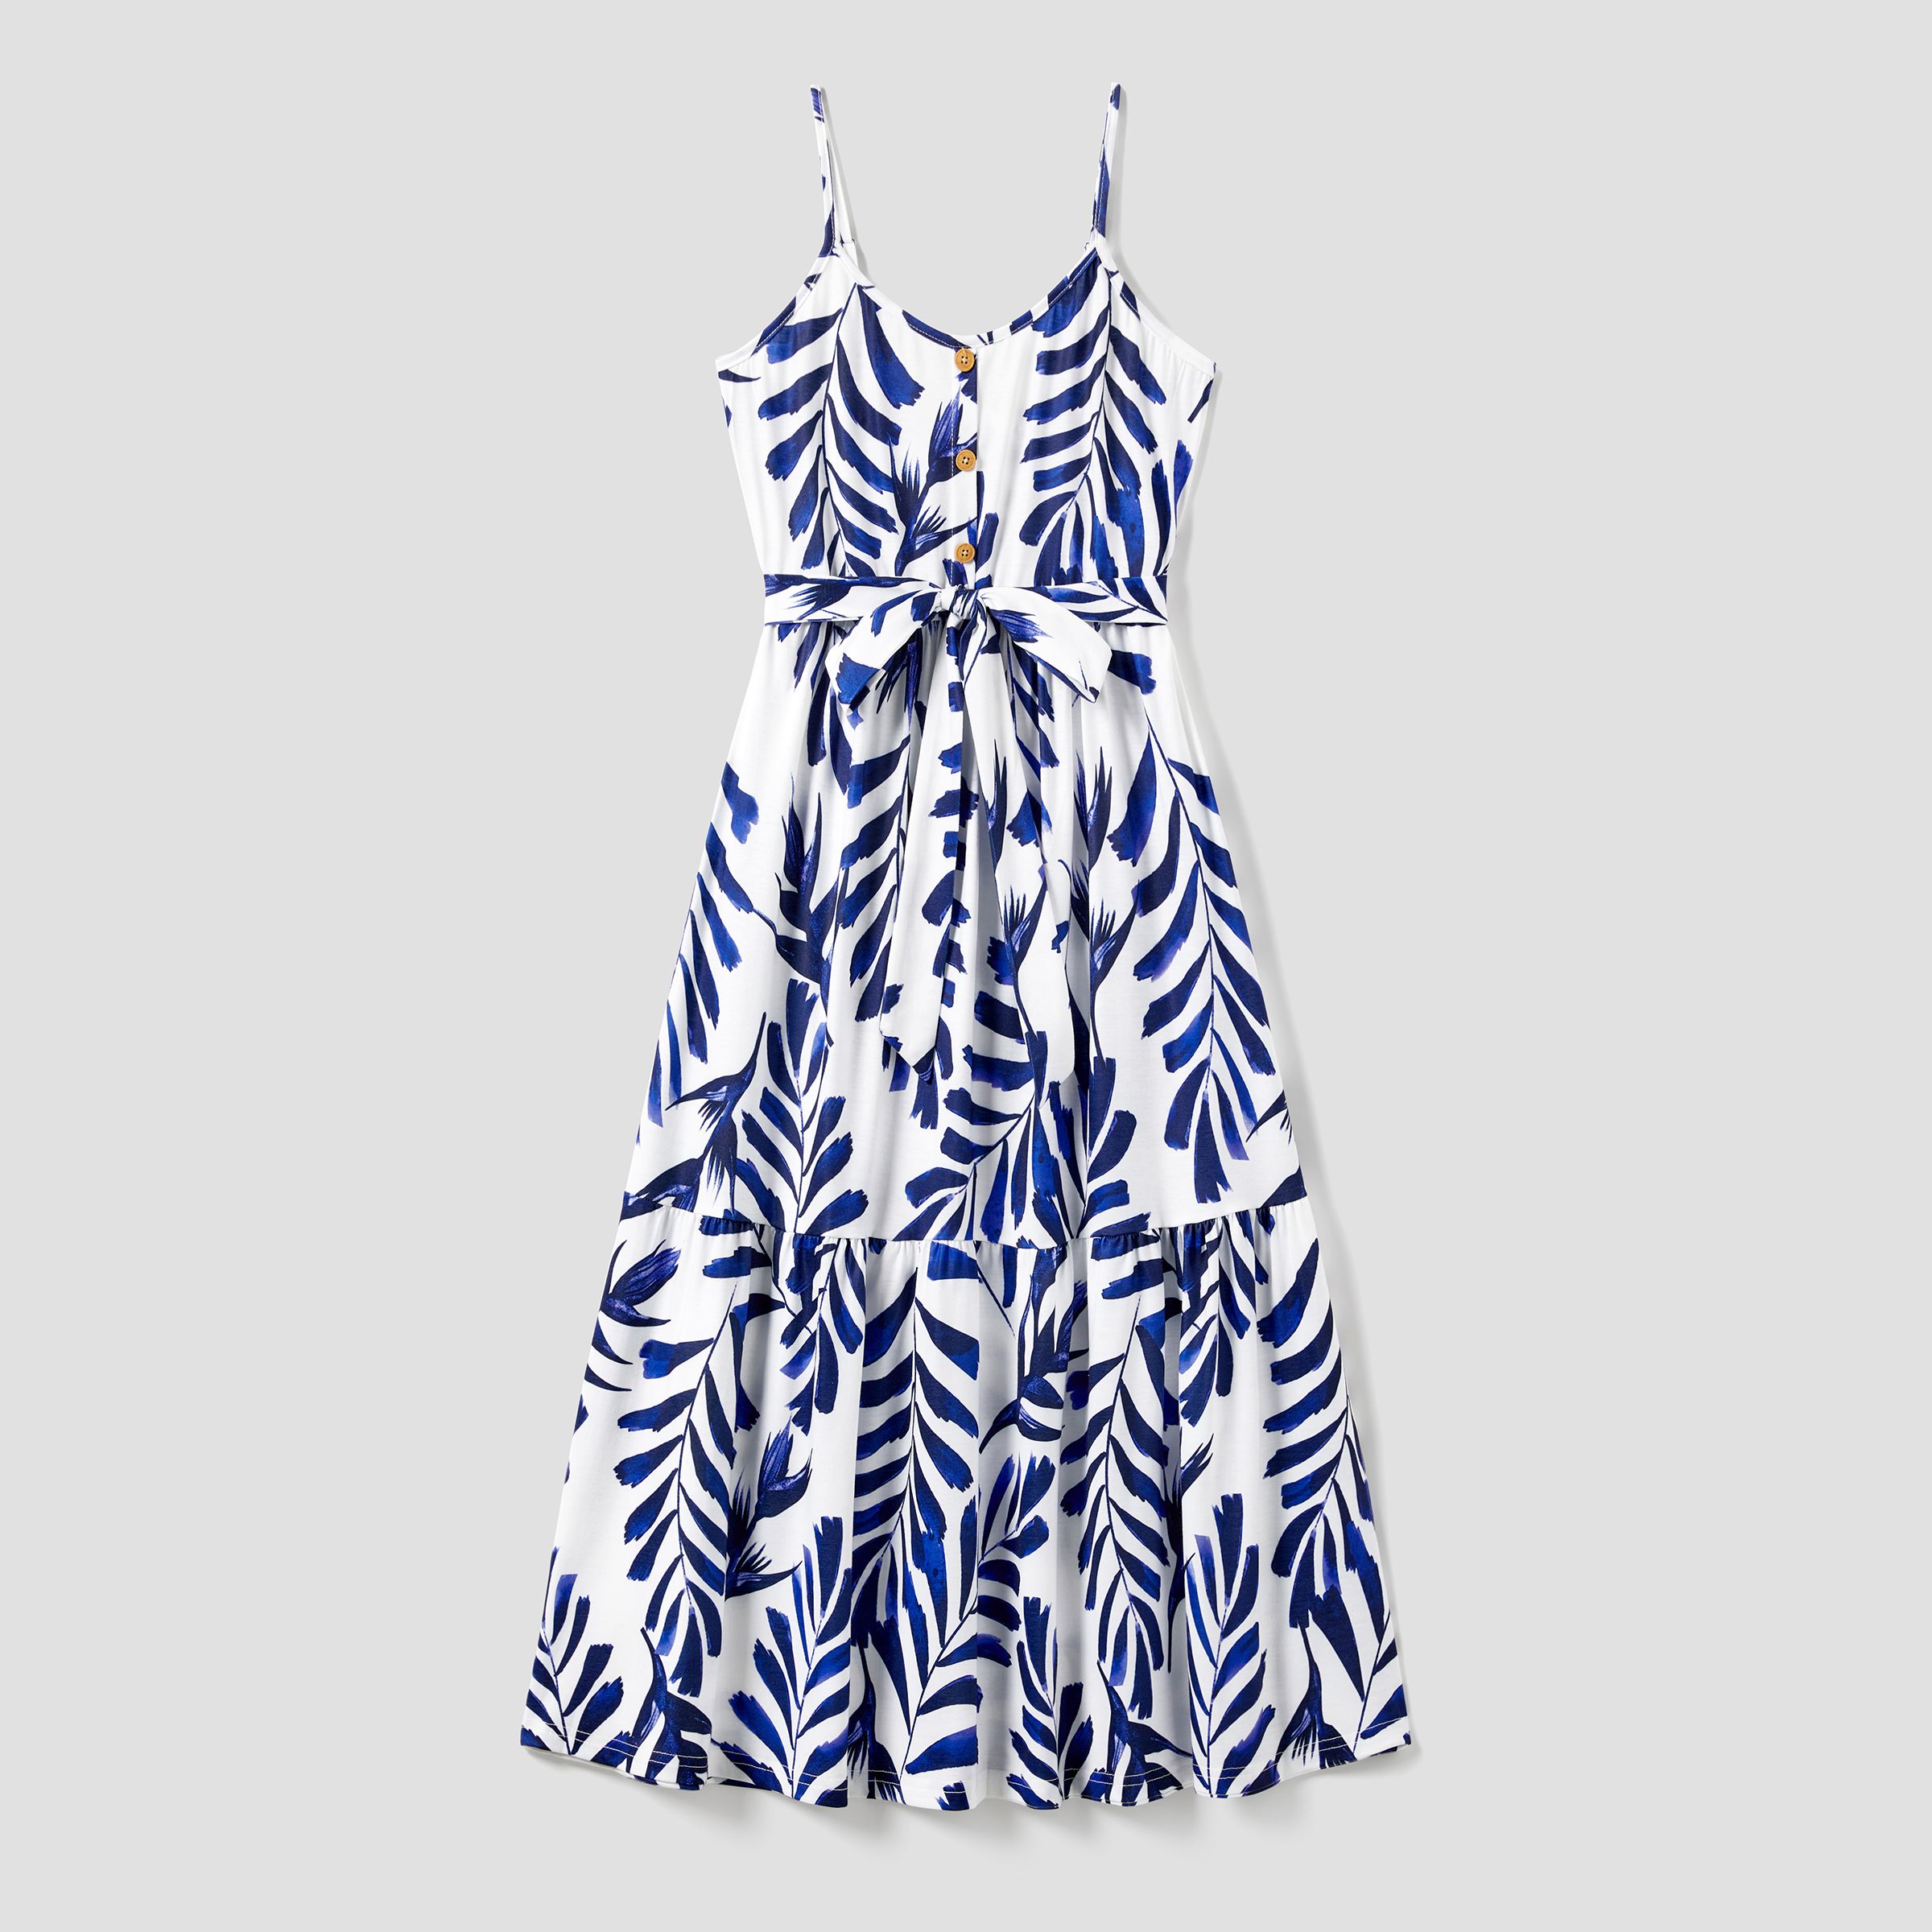 Family Matching Modern Blue and White Botanical Leaf Design Button Strap Dress and Color Block Tee S